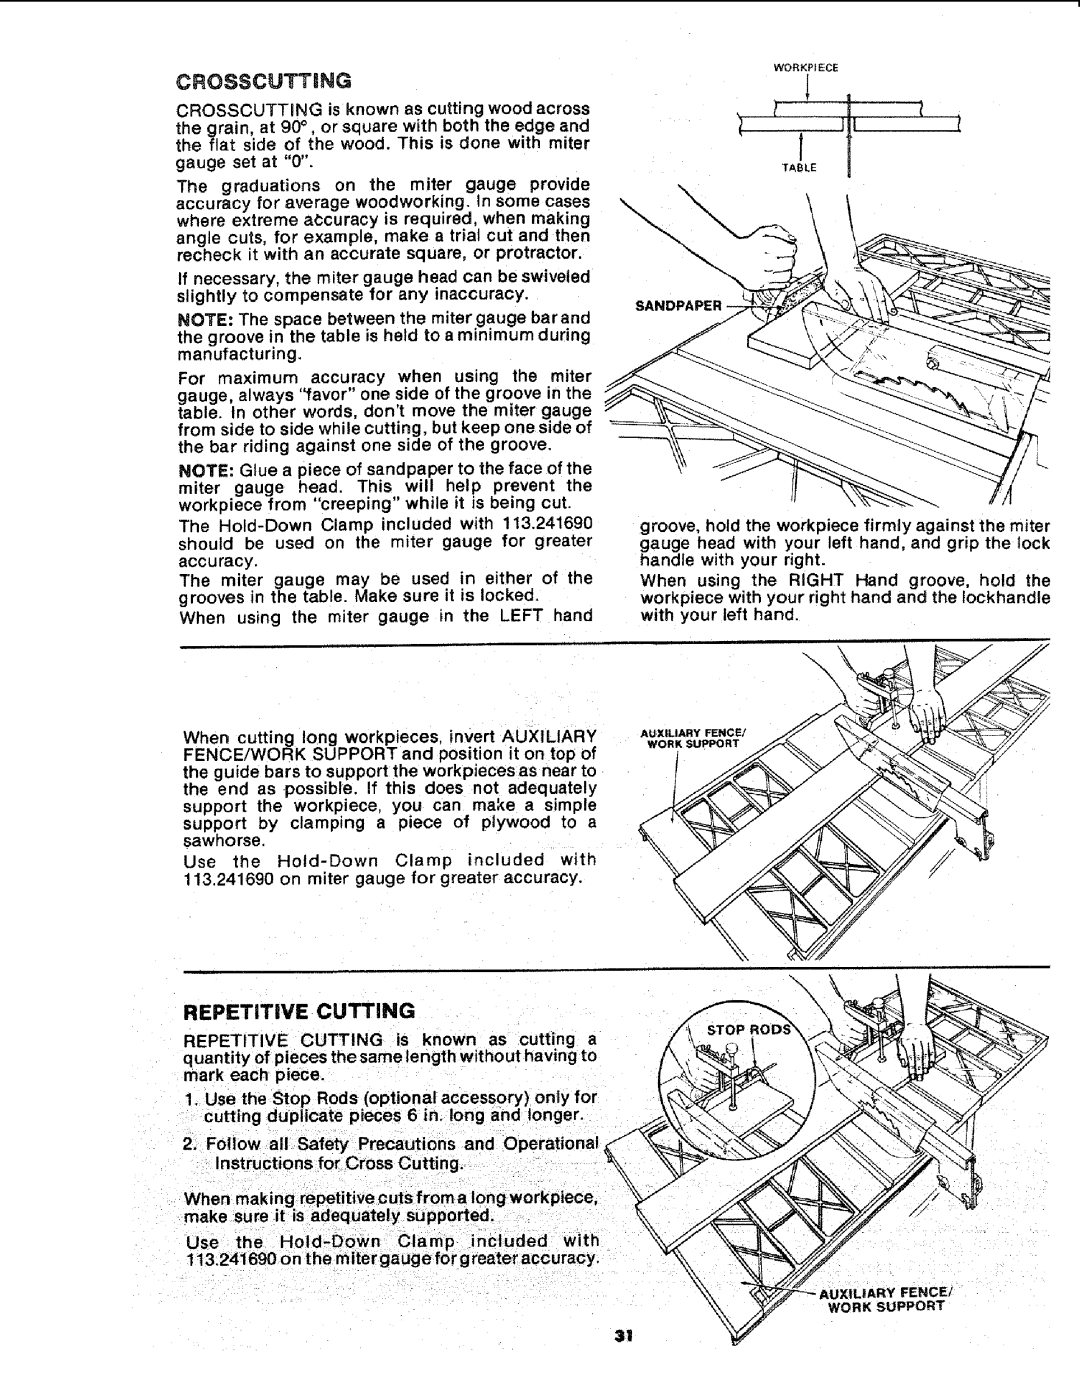 Sears 113.241591 owner manual Crosscutting, REPETiTiVE CUTTING 